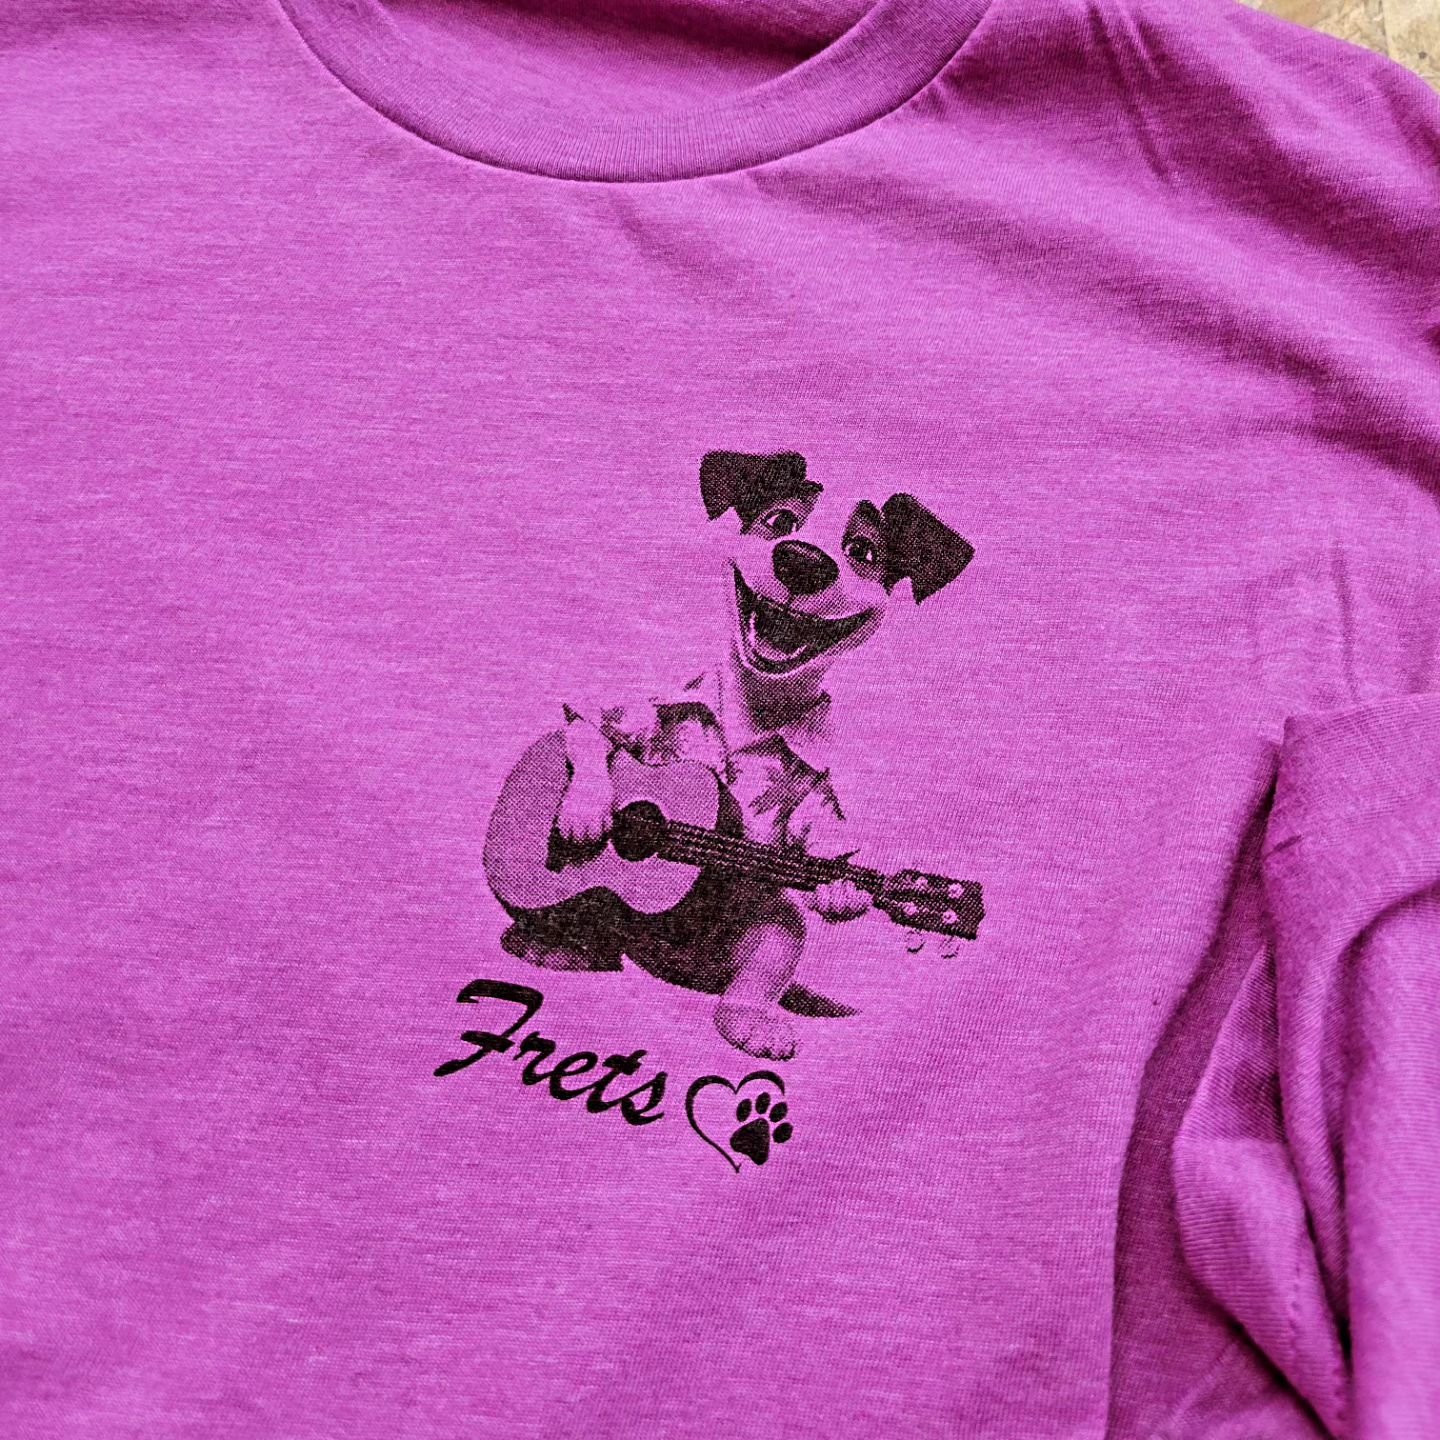 Shirts for this year's Mighty Uke day, featuring Frets! Going on this upcoming weekend.